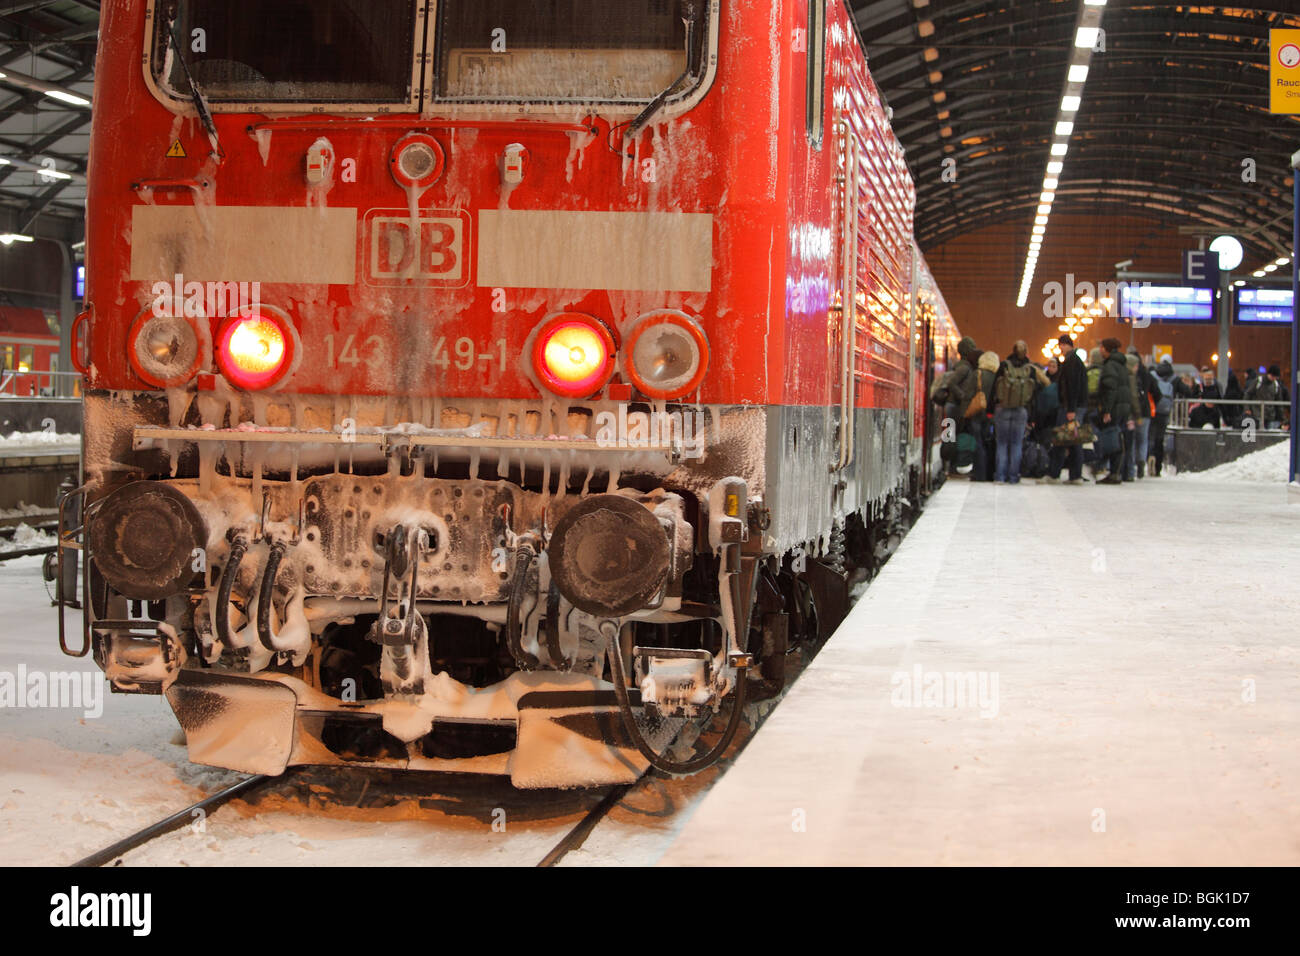 travelers boarding an icy train of German Railways (Deutsche Bahn), winter conditions on the roofed station platforms Stock Photo